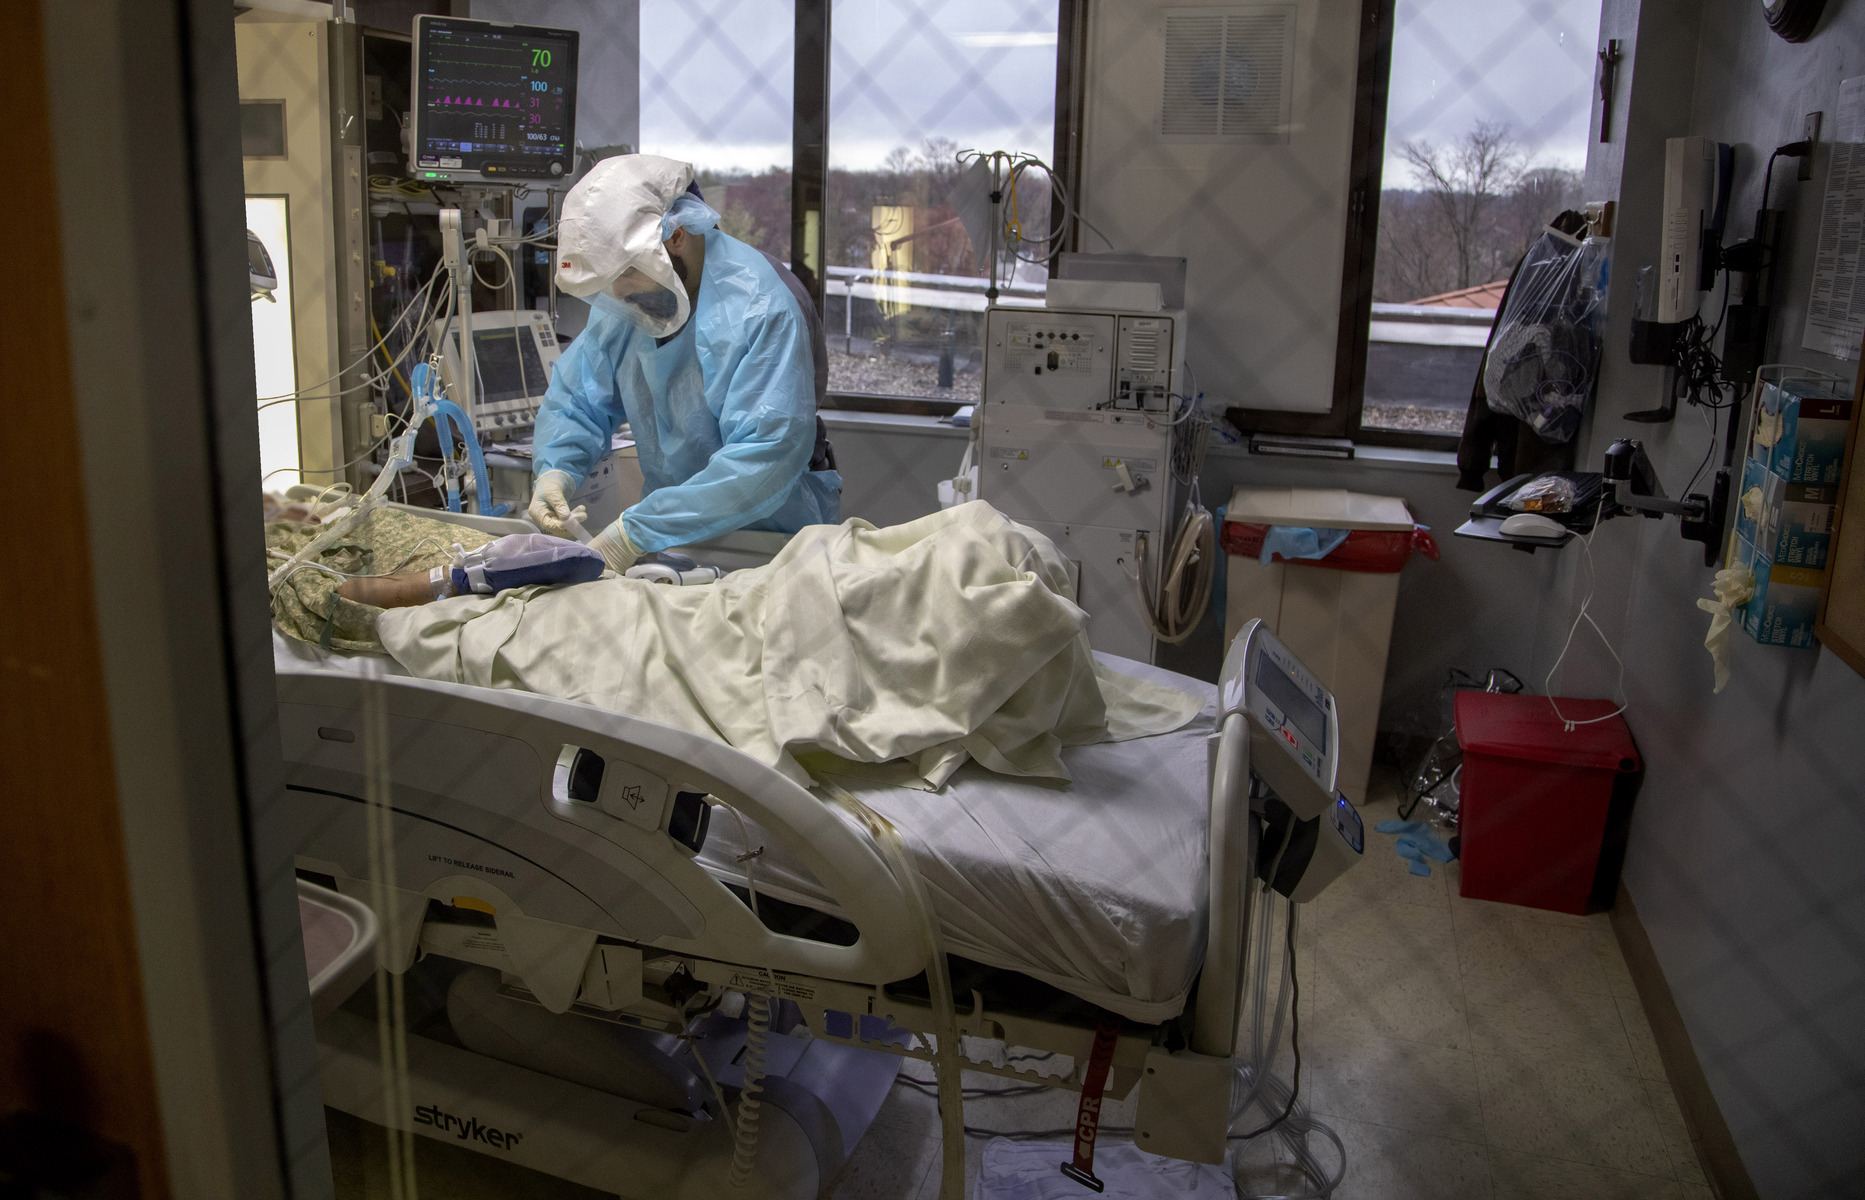 Ranvir Singh, RN in the  ICU inside Holy Name Medical Center in Teaneck, New Jersey, cares for a patient during the first few days of the COVID-19 Pandemic. 03/19/2020 Photos by Jeff Rhode